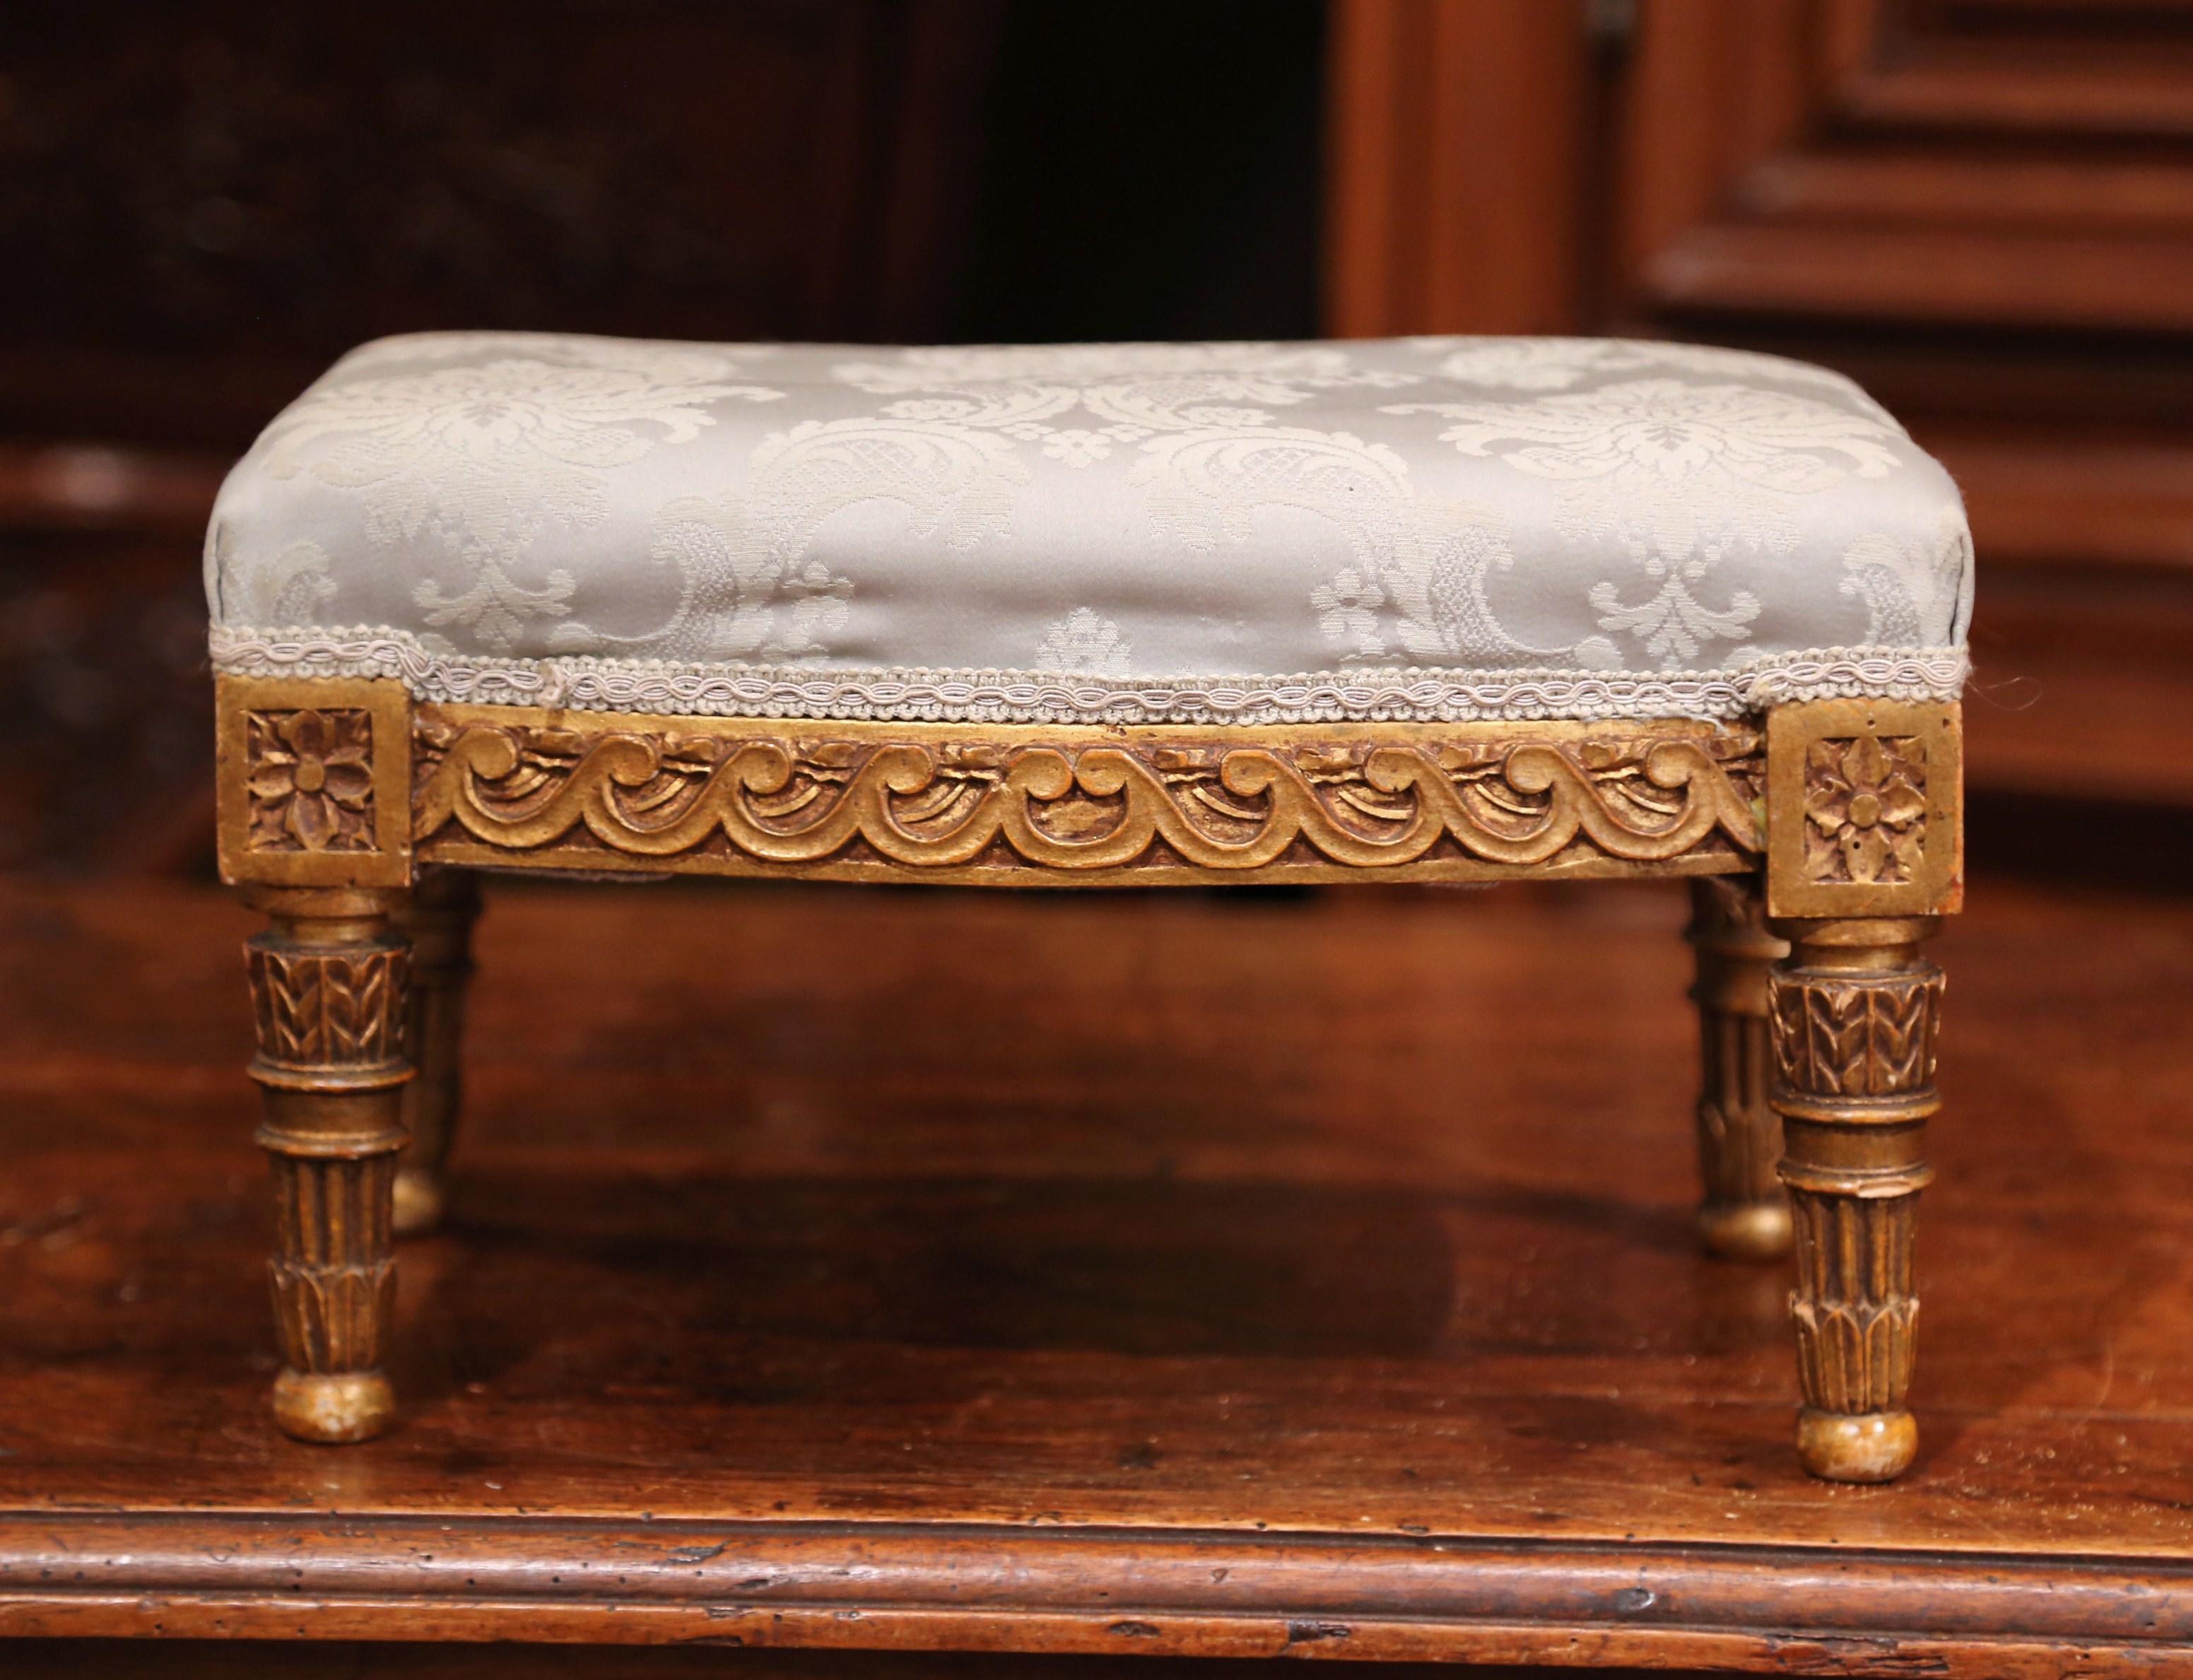 Pair of 19th Century French Louis XVI Carved Giltwood Footstools (19. Jahrhundert)